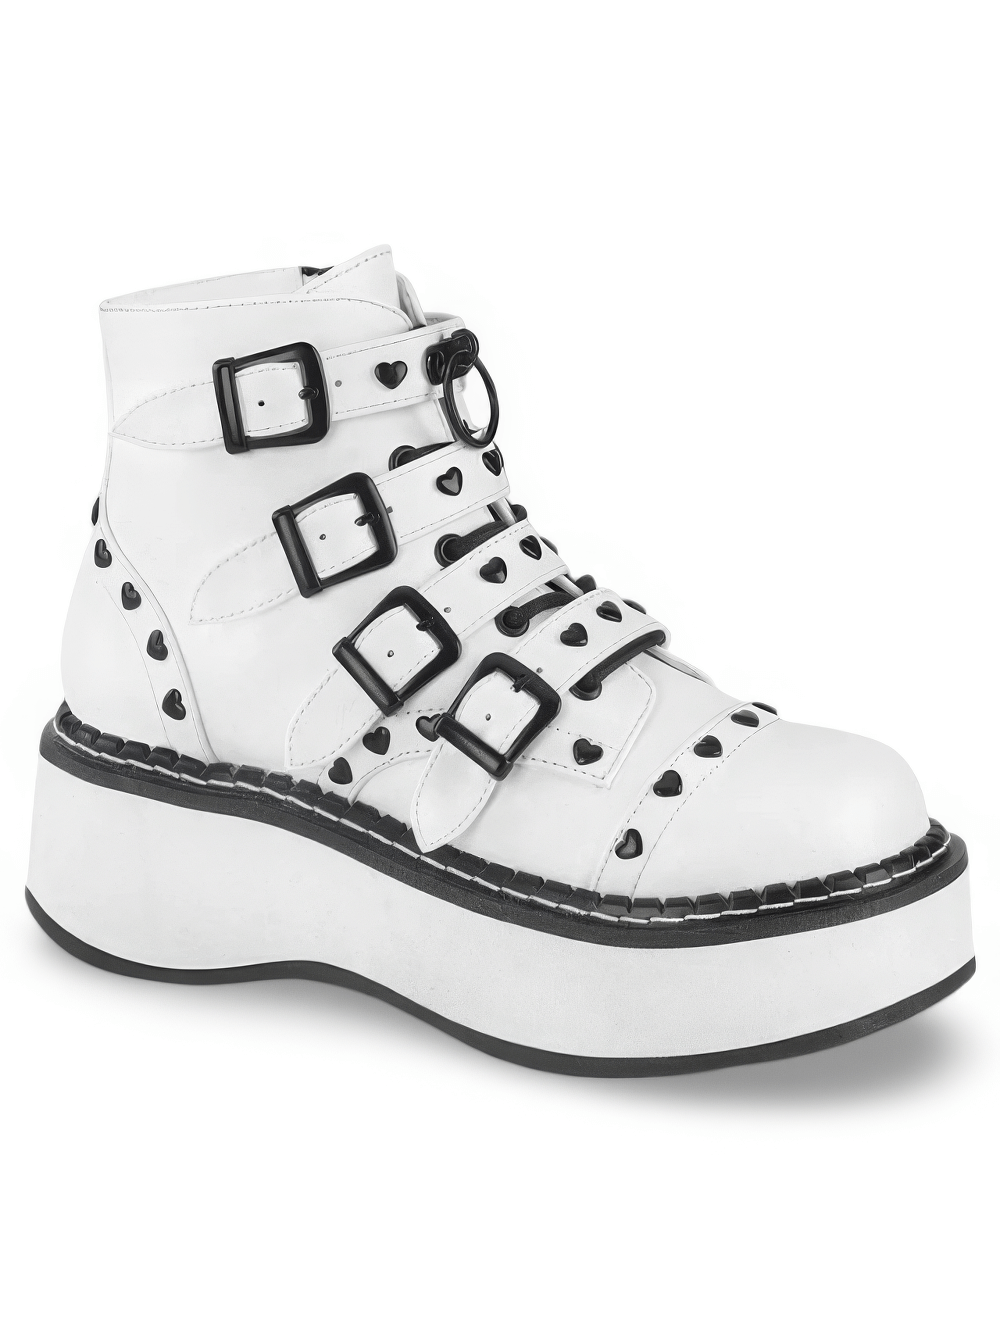 DEMONIA White Platform Buckle Strap Boots with Heart Studs